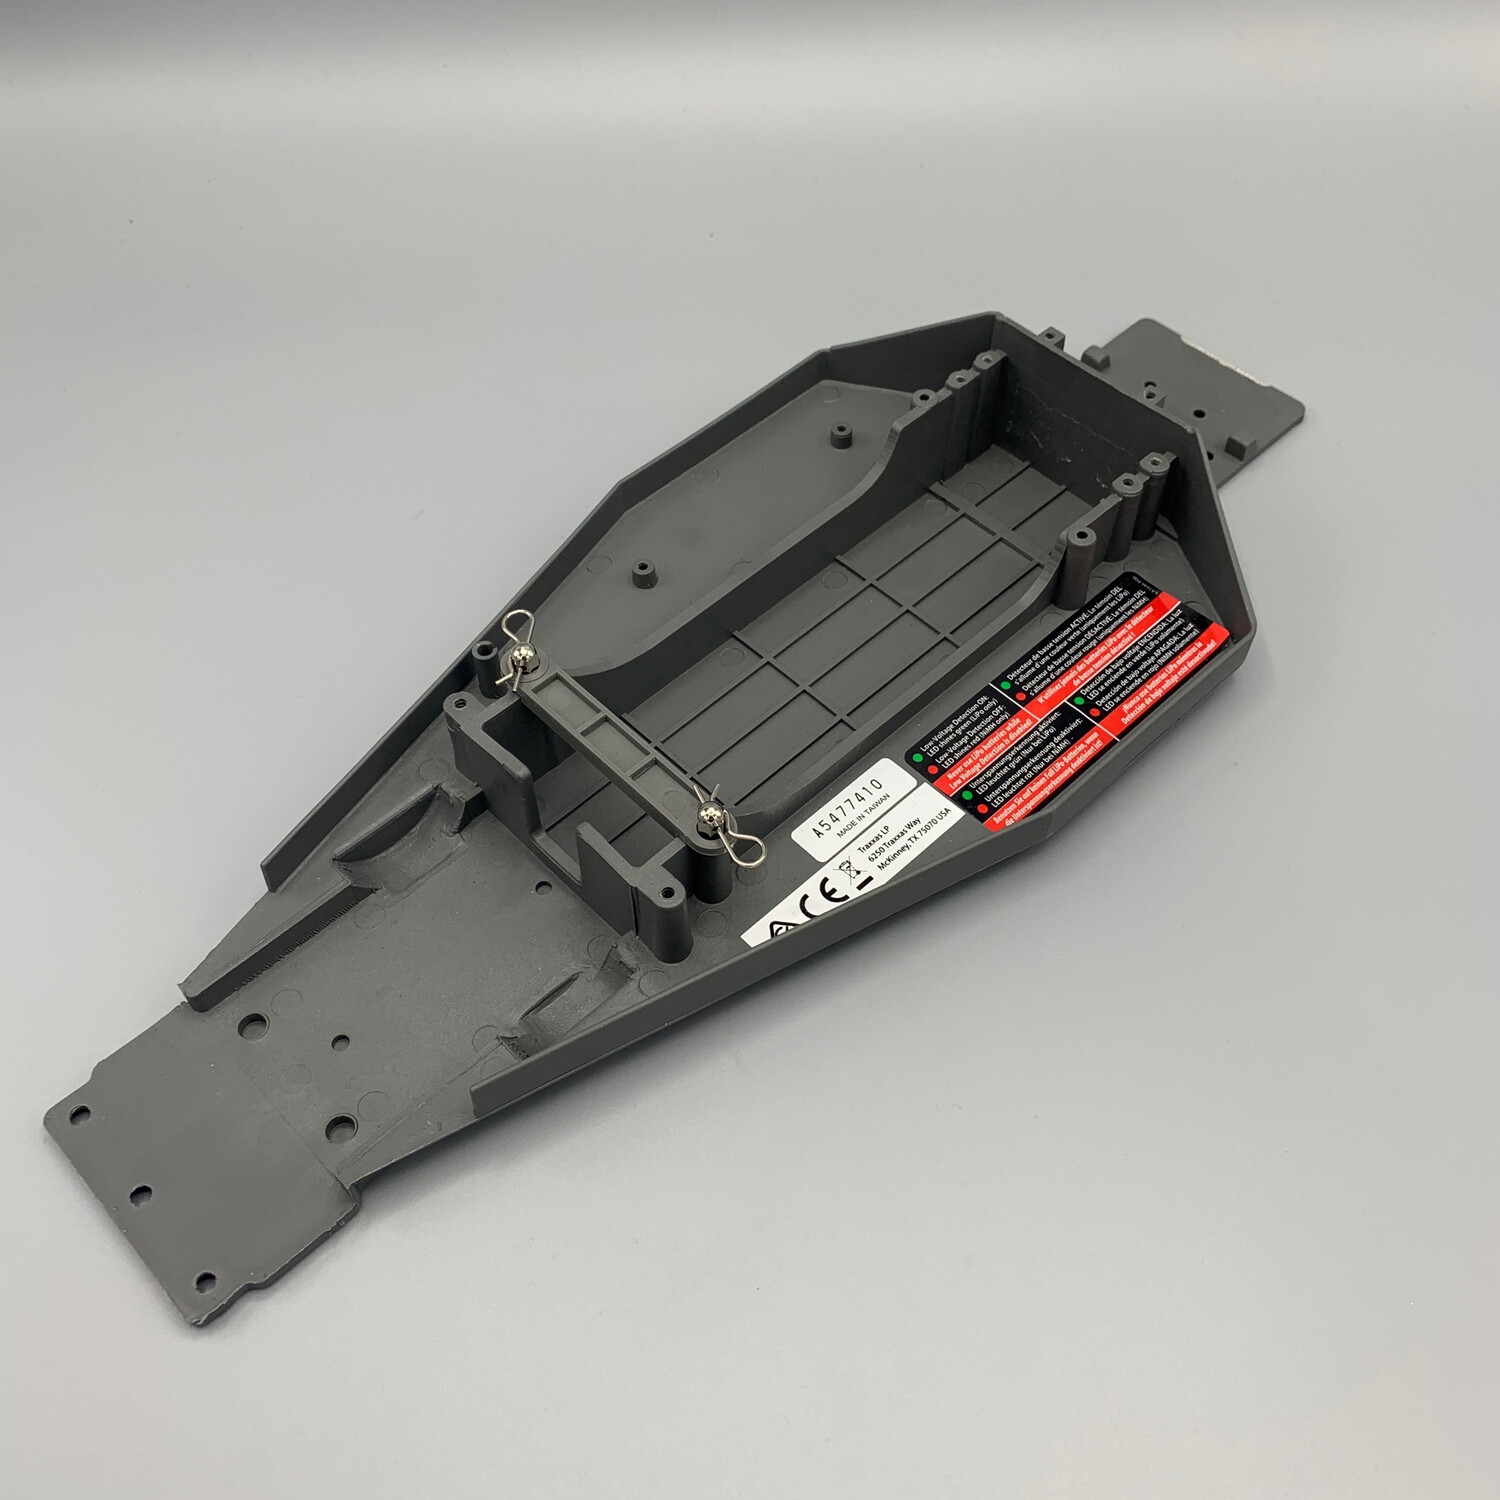 Traxxas Bandit Stock Plastic Chassis 3722